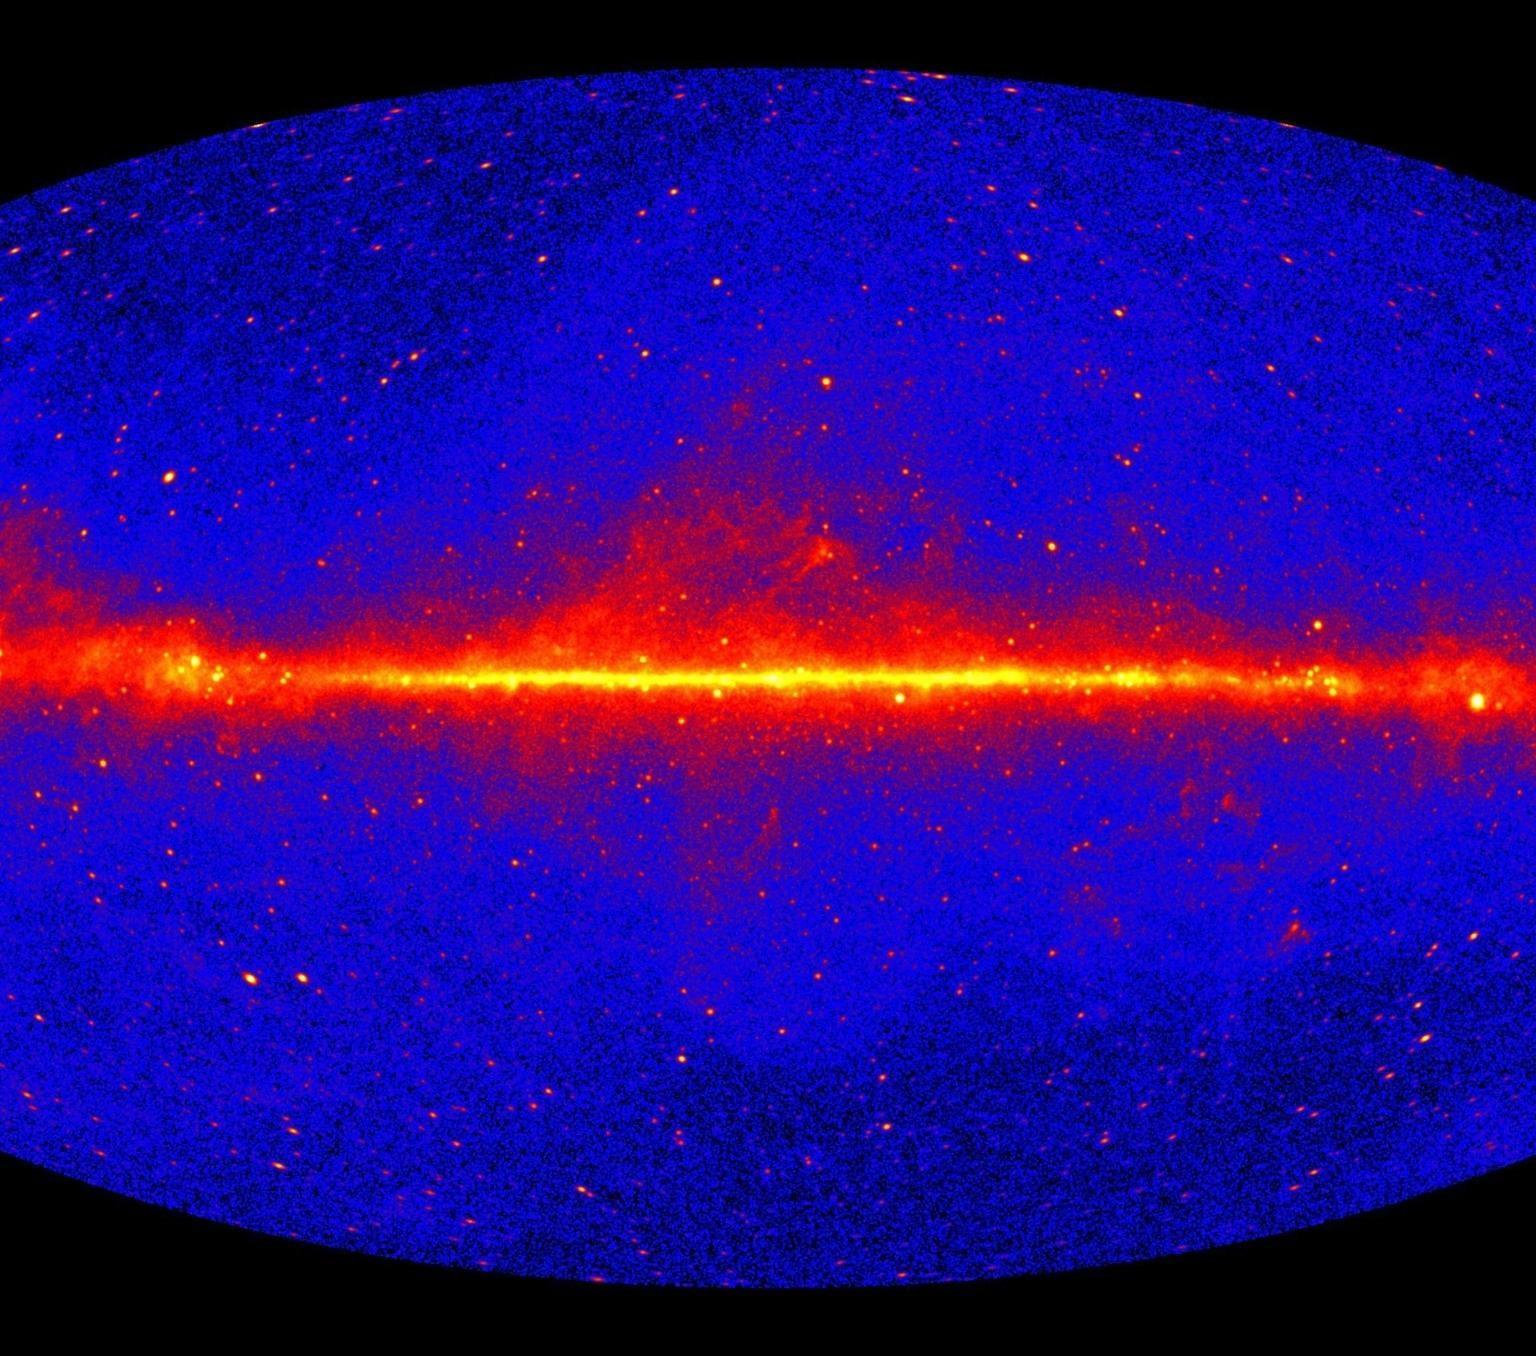 A detailed look at the gamma-ray sky. There is a blue oval with a red, orange and yellow line running through the middle of the oval